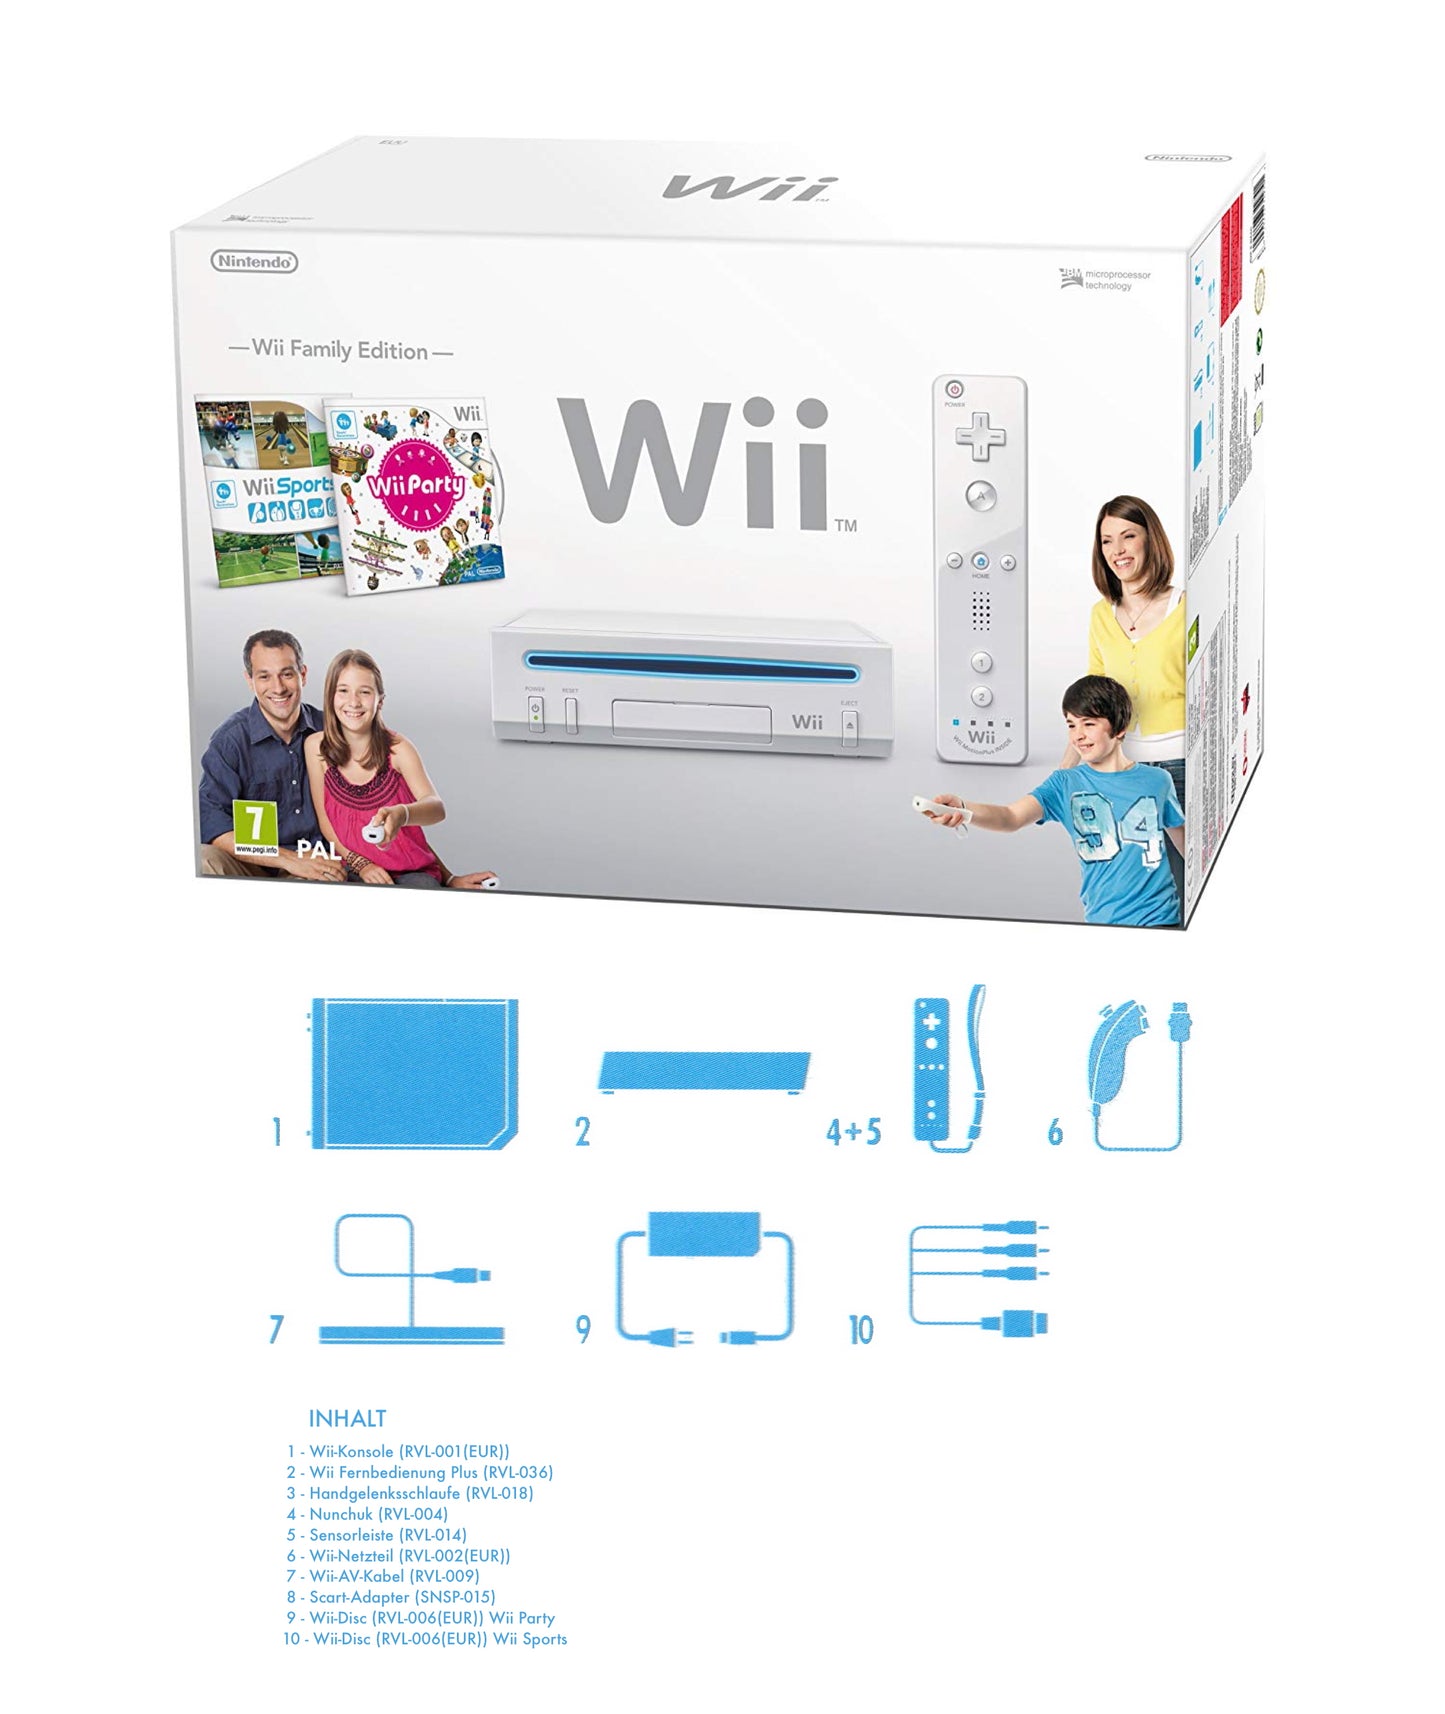 Wii "Family Edition" inkl. Controller, Wii Party & Wii Sports